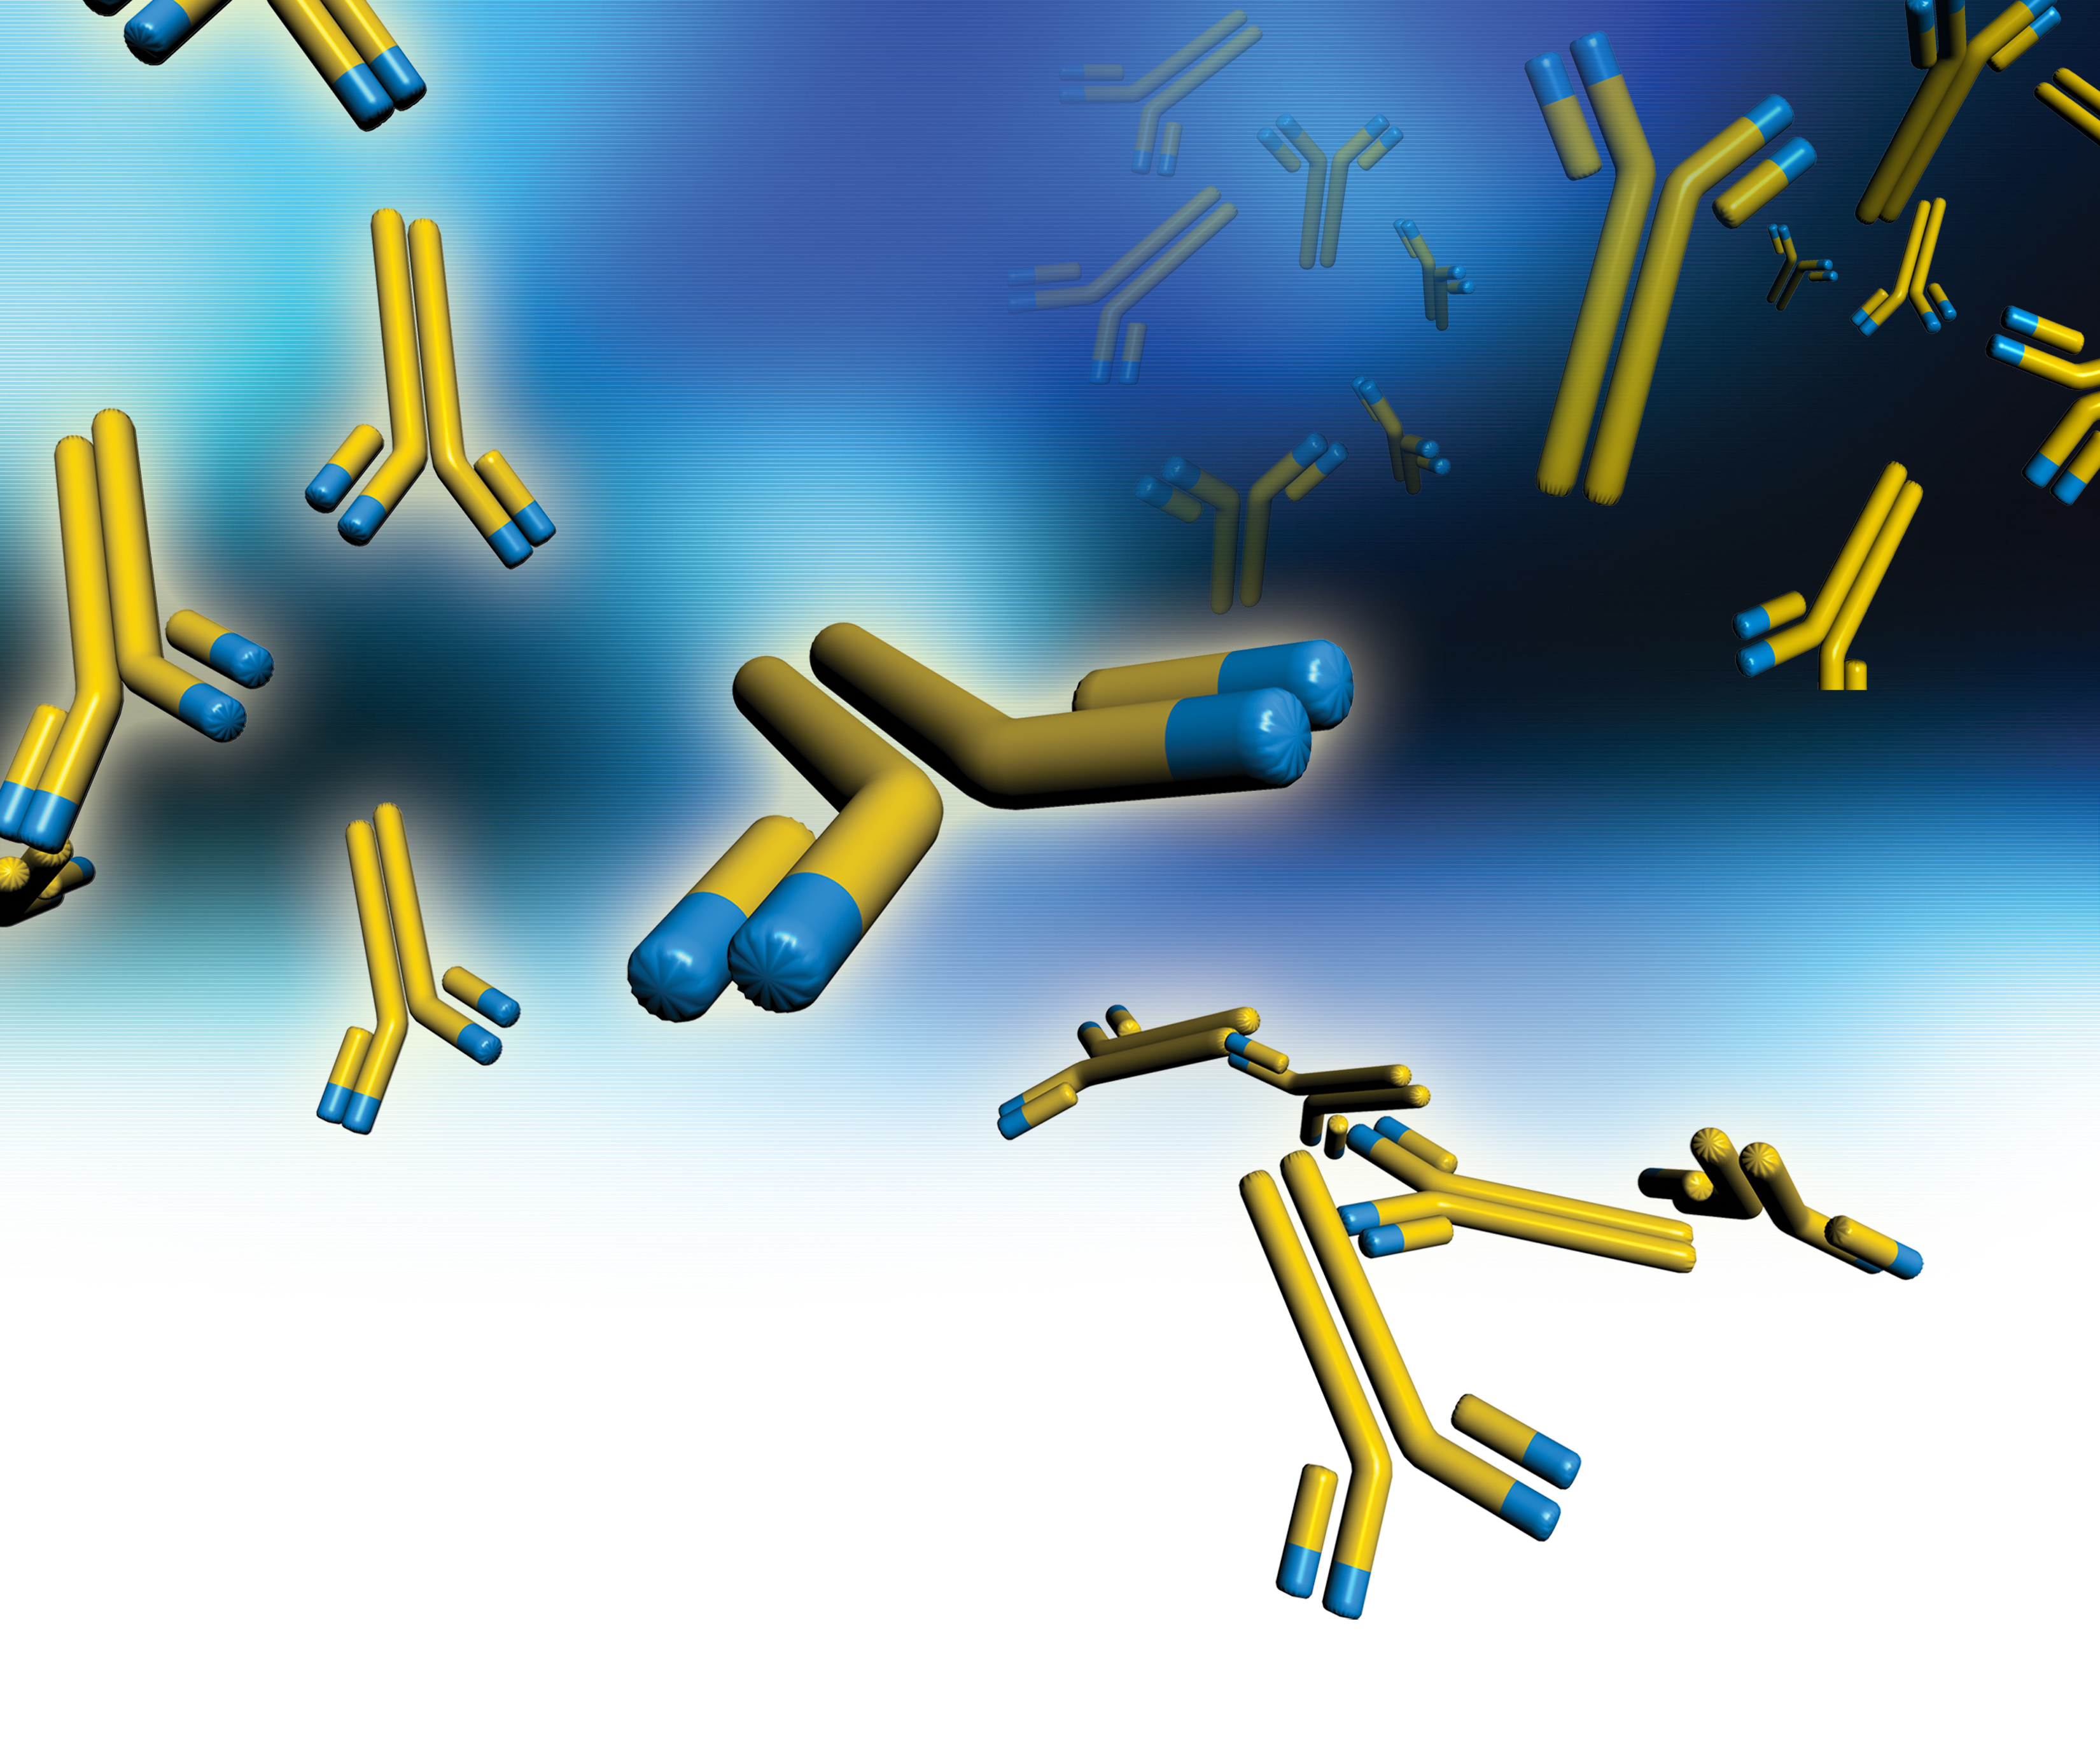 ProMIS Neurosciences develops antibodies targeting only the toxic form of amyloid-beta with the help of technologies analyzing protein surface structures in detail.